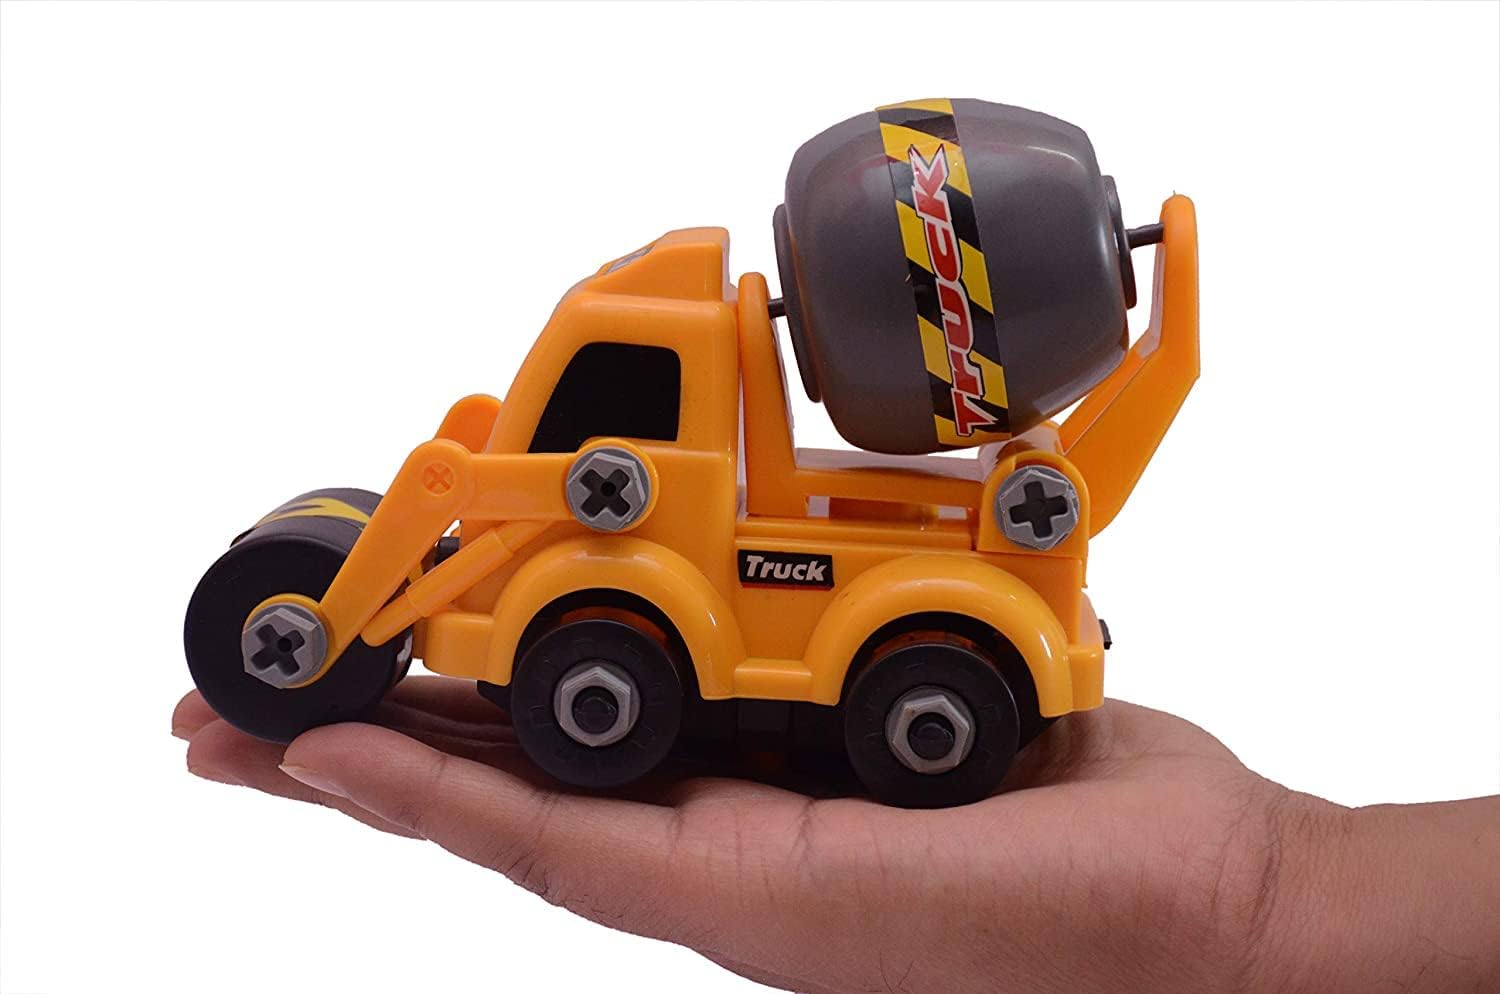 4565a Engineering vehicles Nut Assembly Vehicle Toy, DIY Nut Assembly Vehicle Model Toy Highly Simulation Children Kids Car Model Toy Set (2 Pc Set)